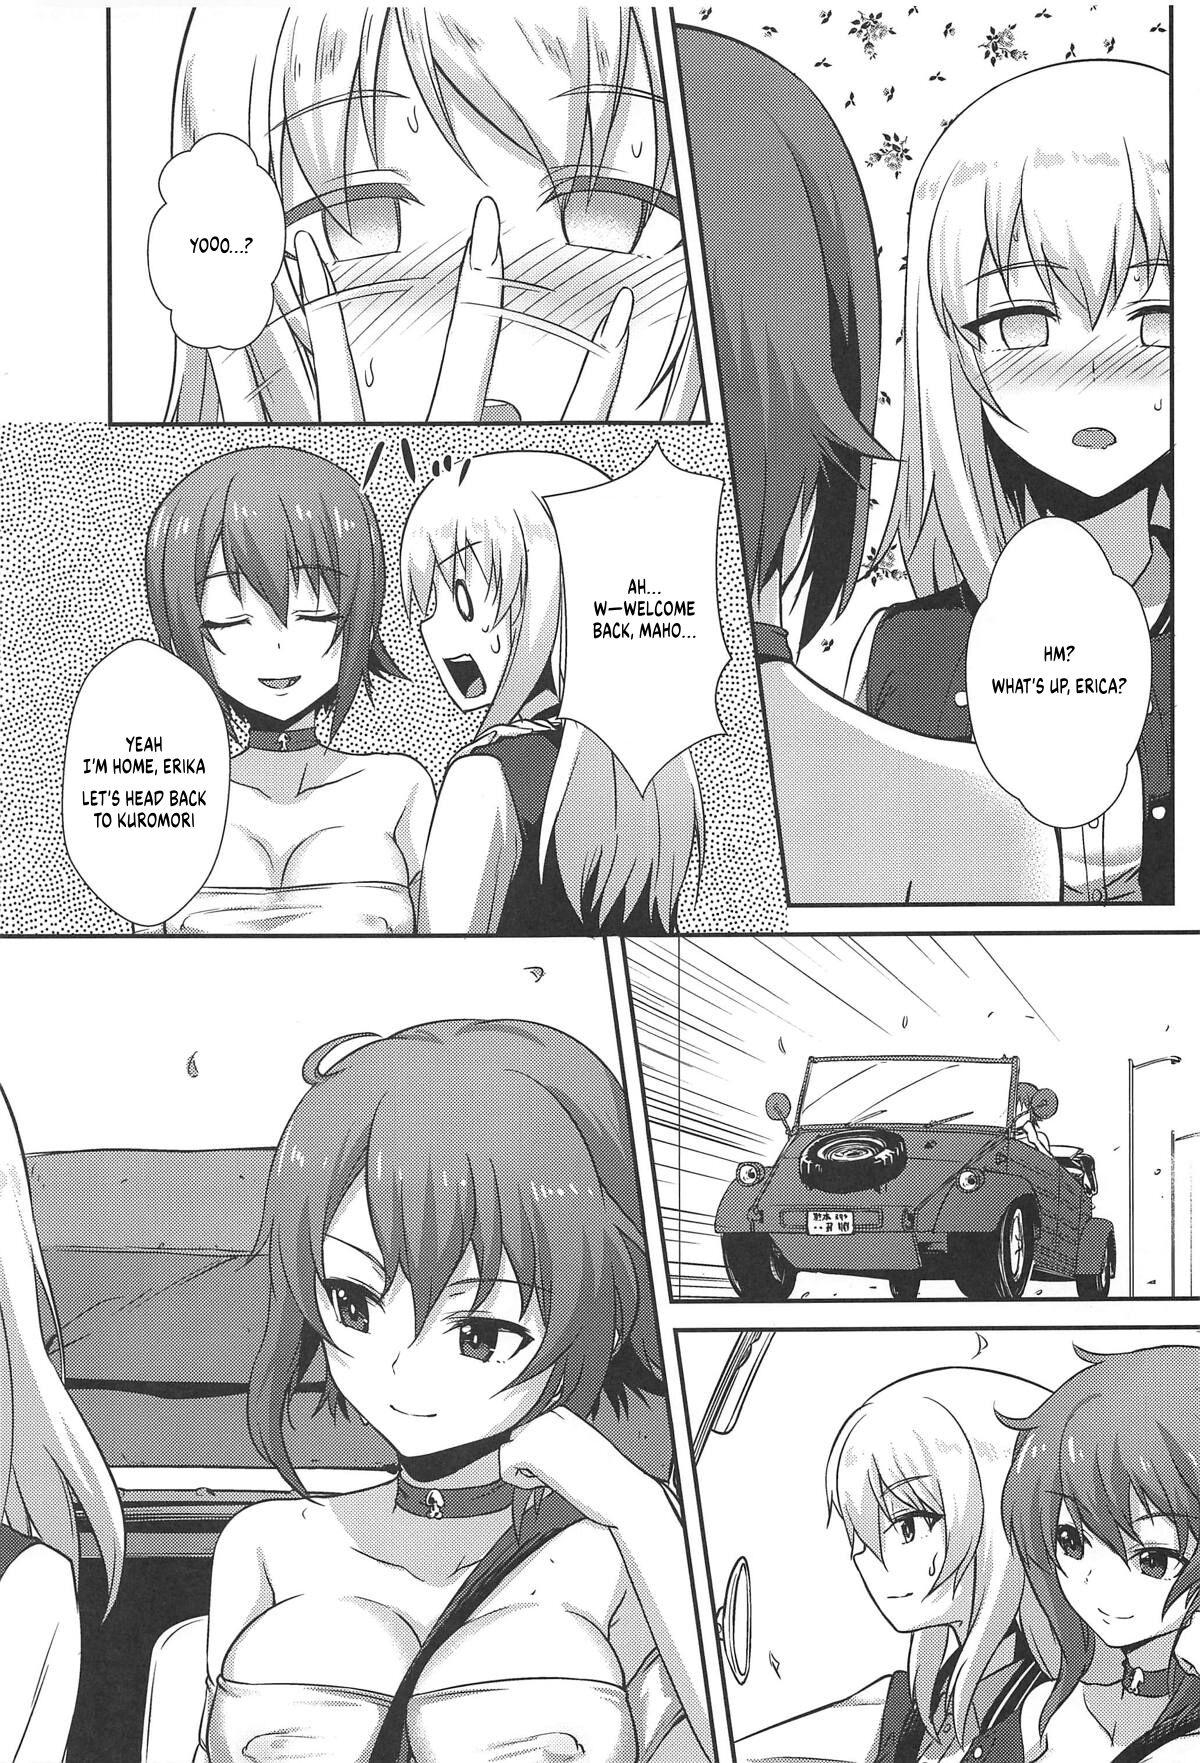 Deep Throat The Way How a Matriarch is Brought Up - Maho's Case, Bottom - Girls und panzer High Heels - Page 7